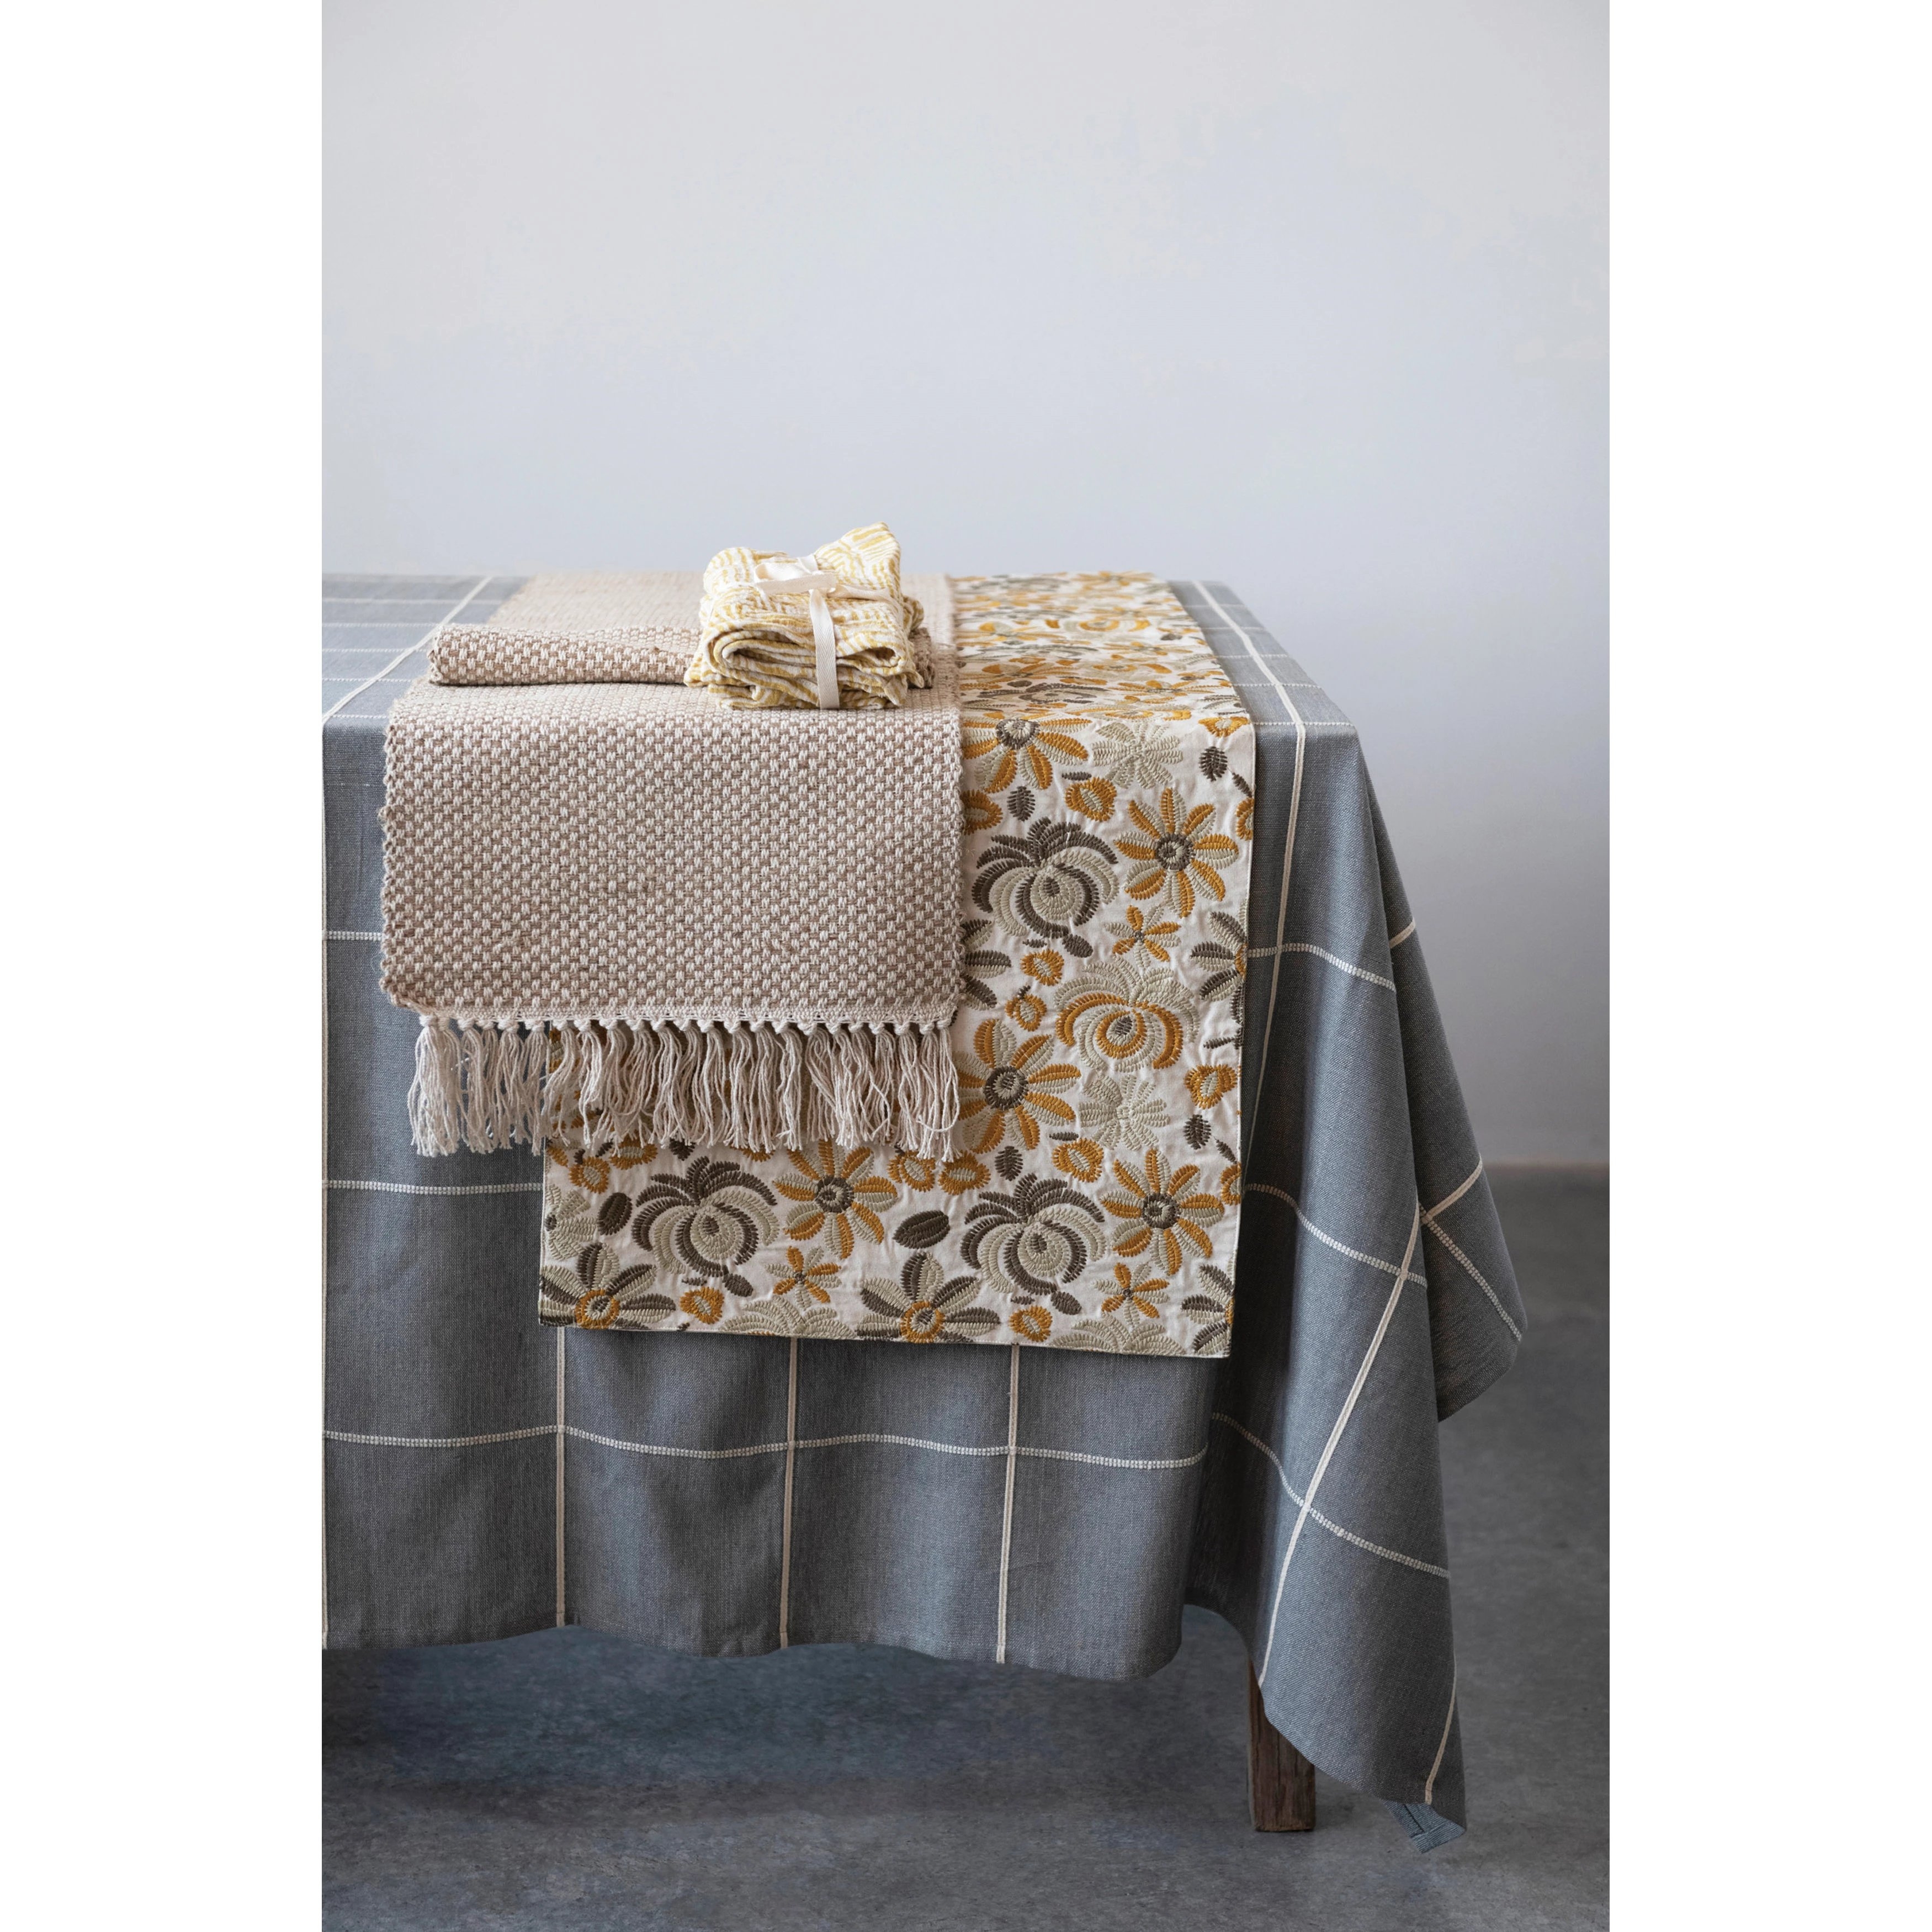 Woven Jute and Cotton Table Runner with Fringe - Image 1